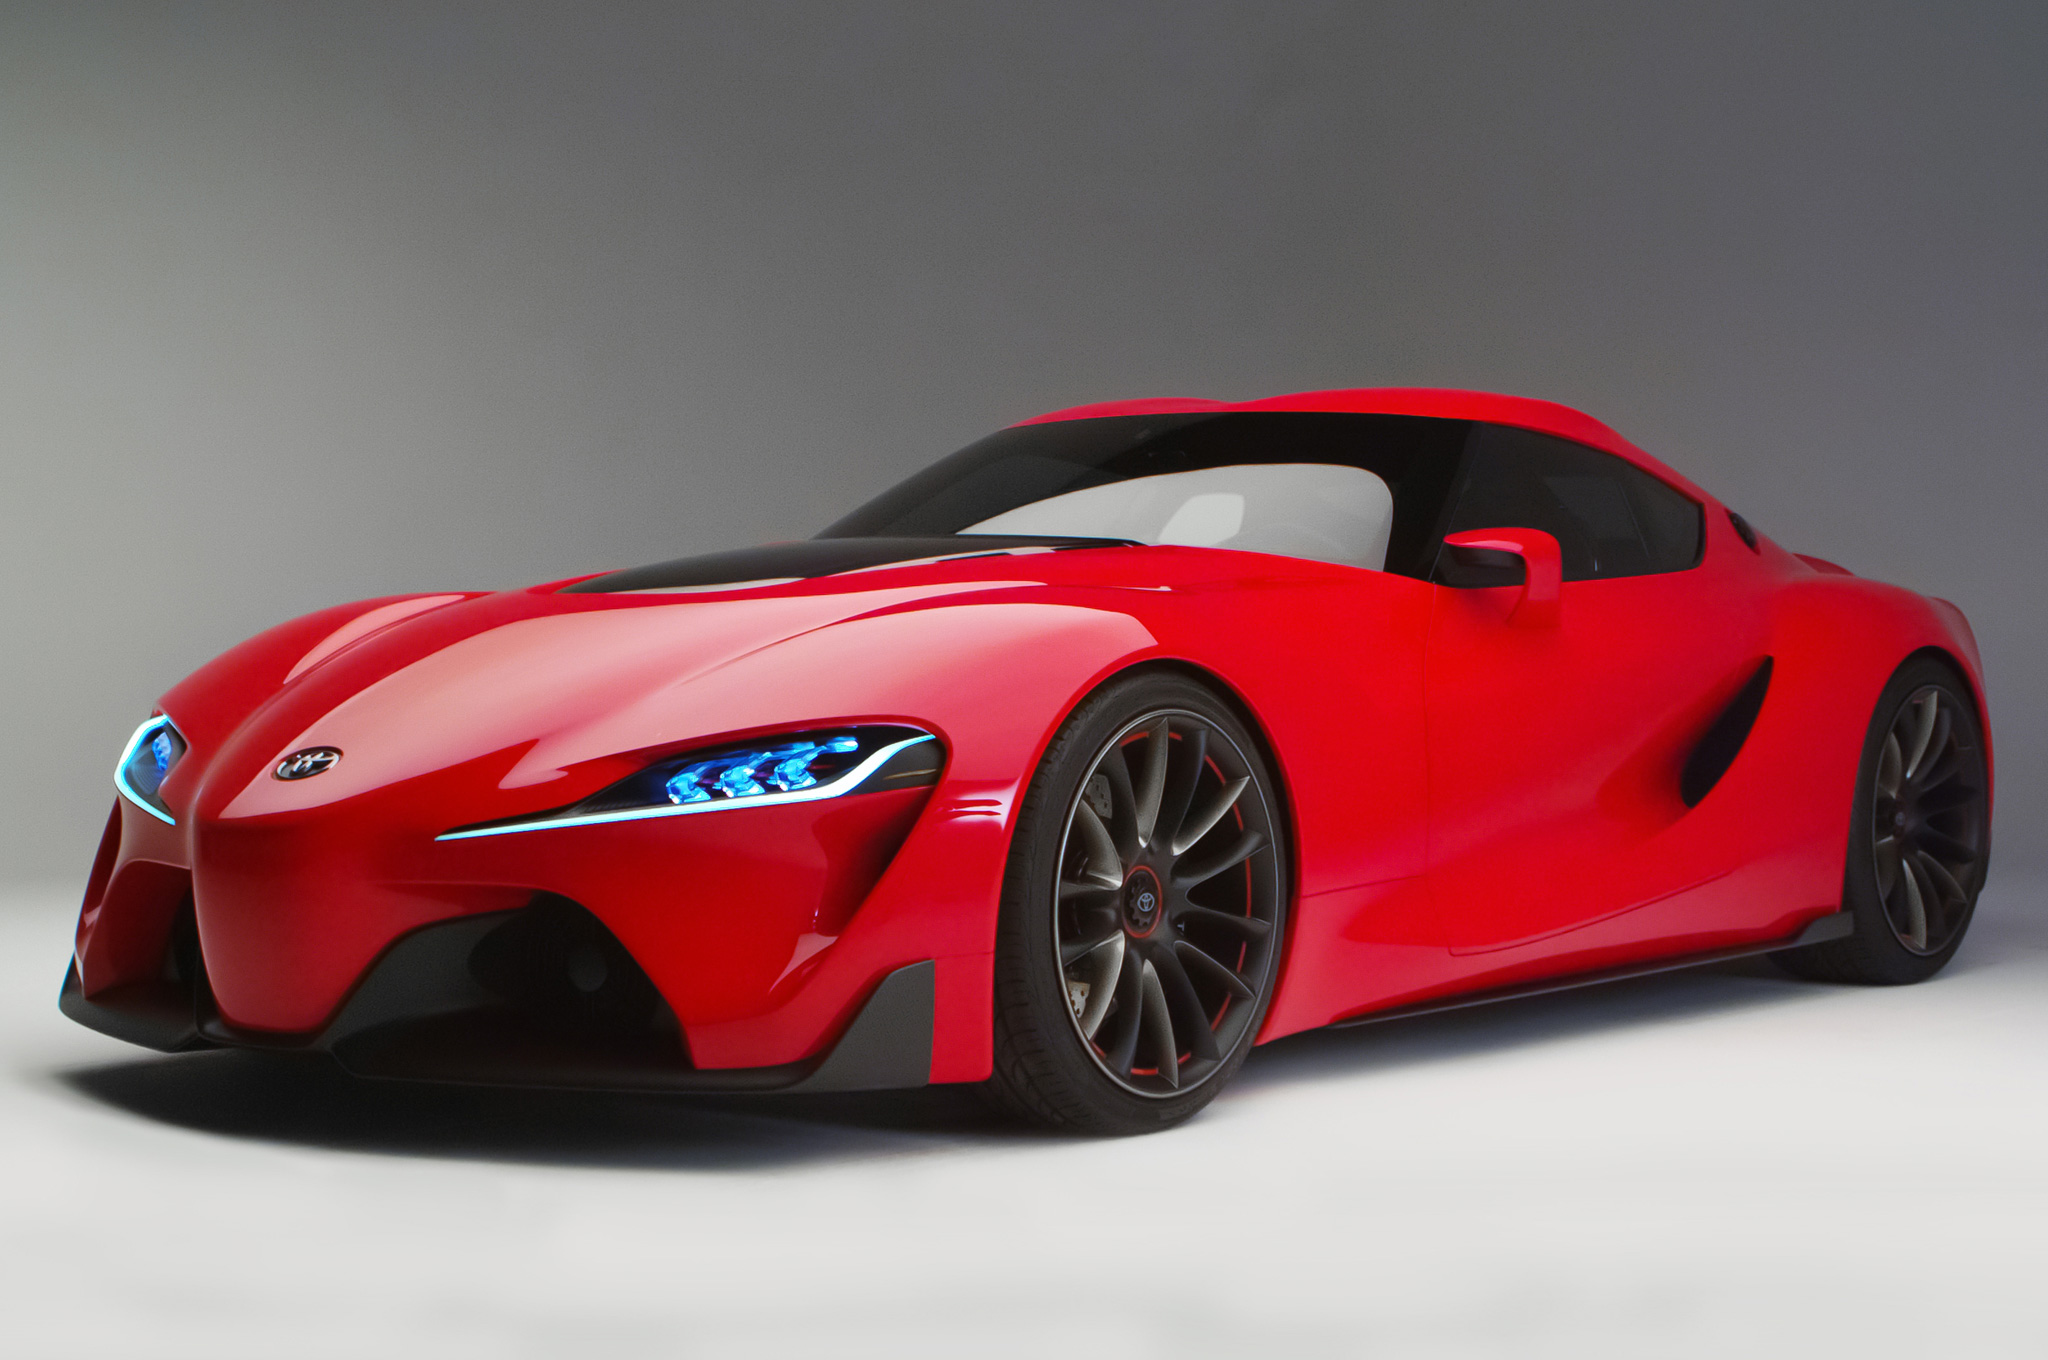 Toyota-FT-1-concept-front-three-quarters-view-in-studio-2.jpg